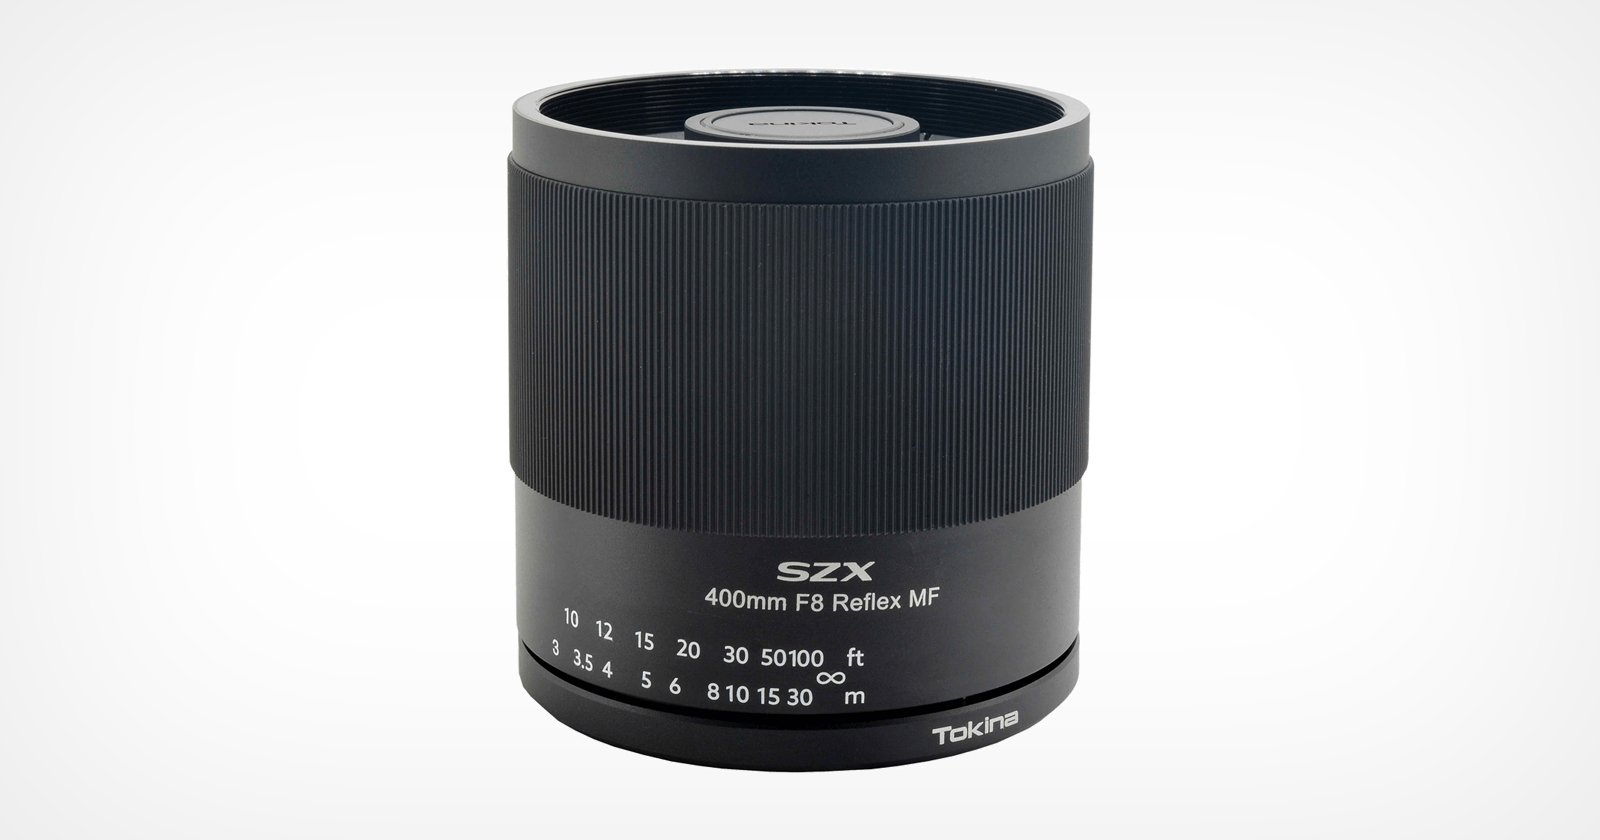 Tokina's 400mm f/8 Reflex Lens Now Available for Canon RF and